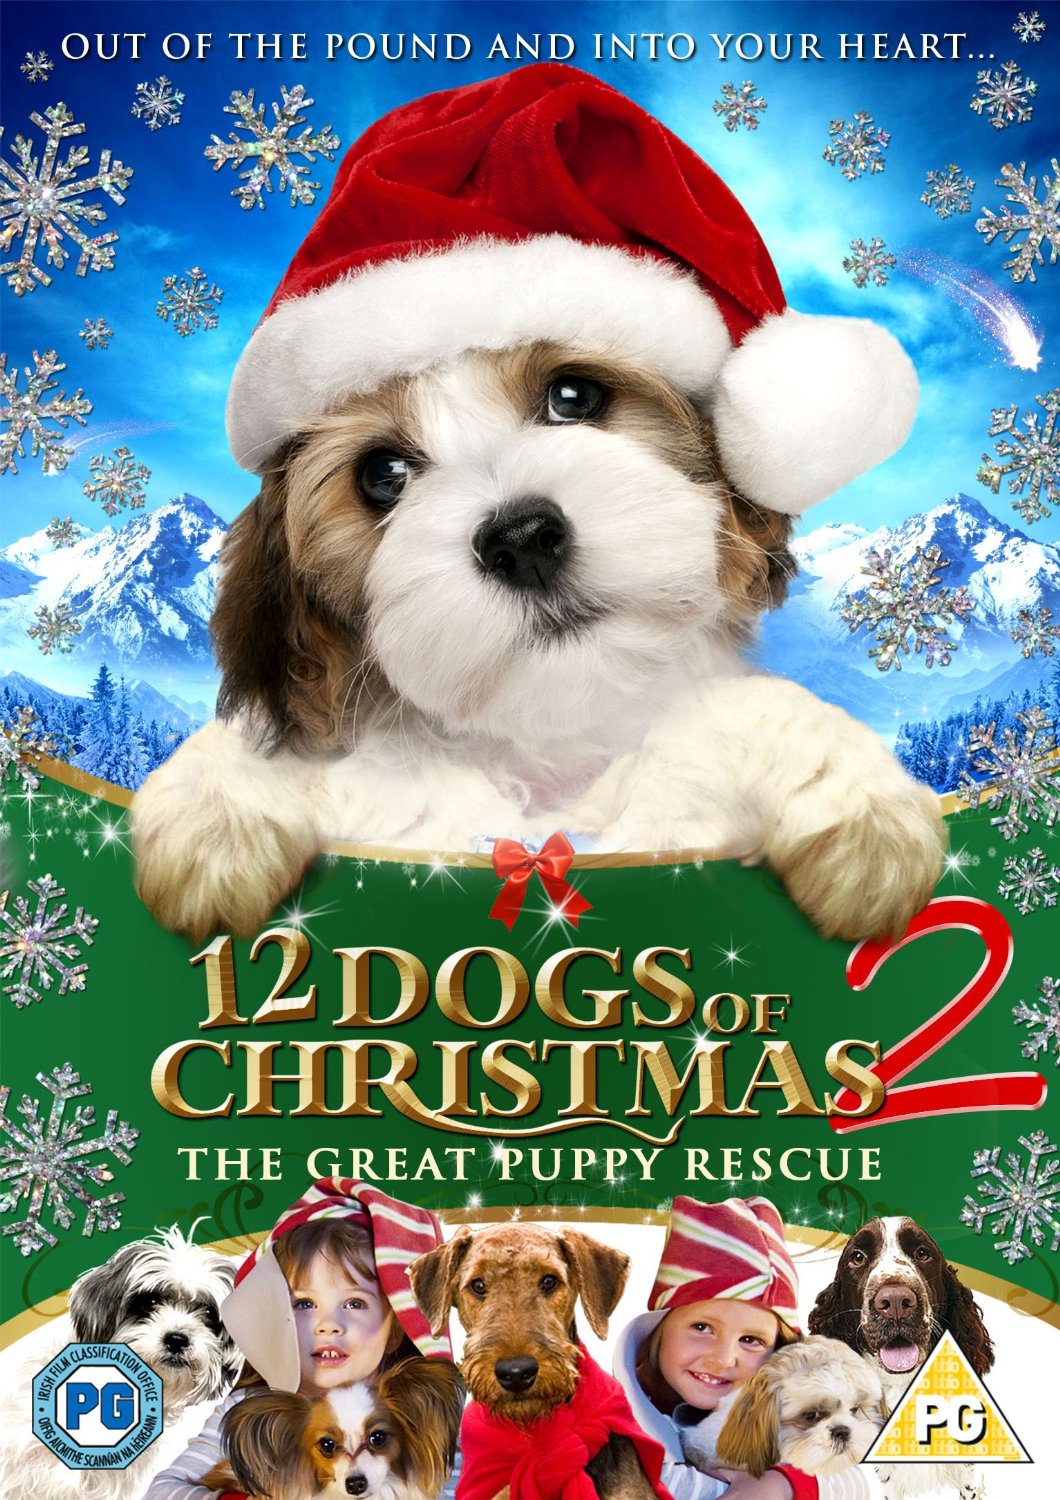 12 Dogs Of Christmas 2 - Great Puppy Rescue (DVD)